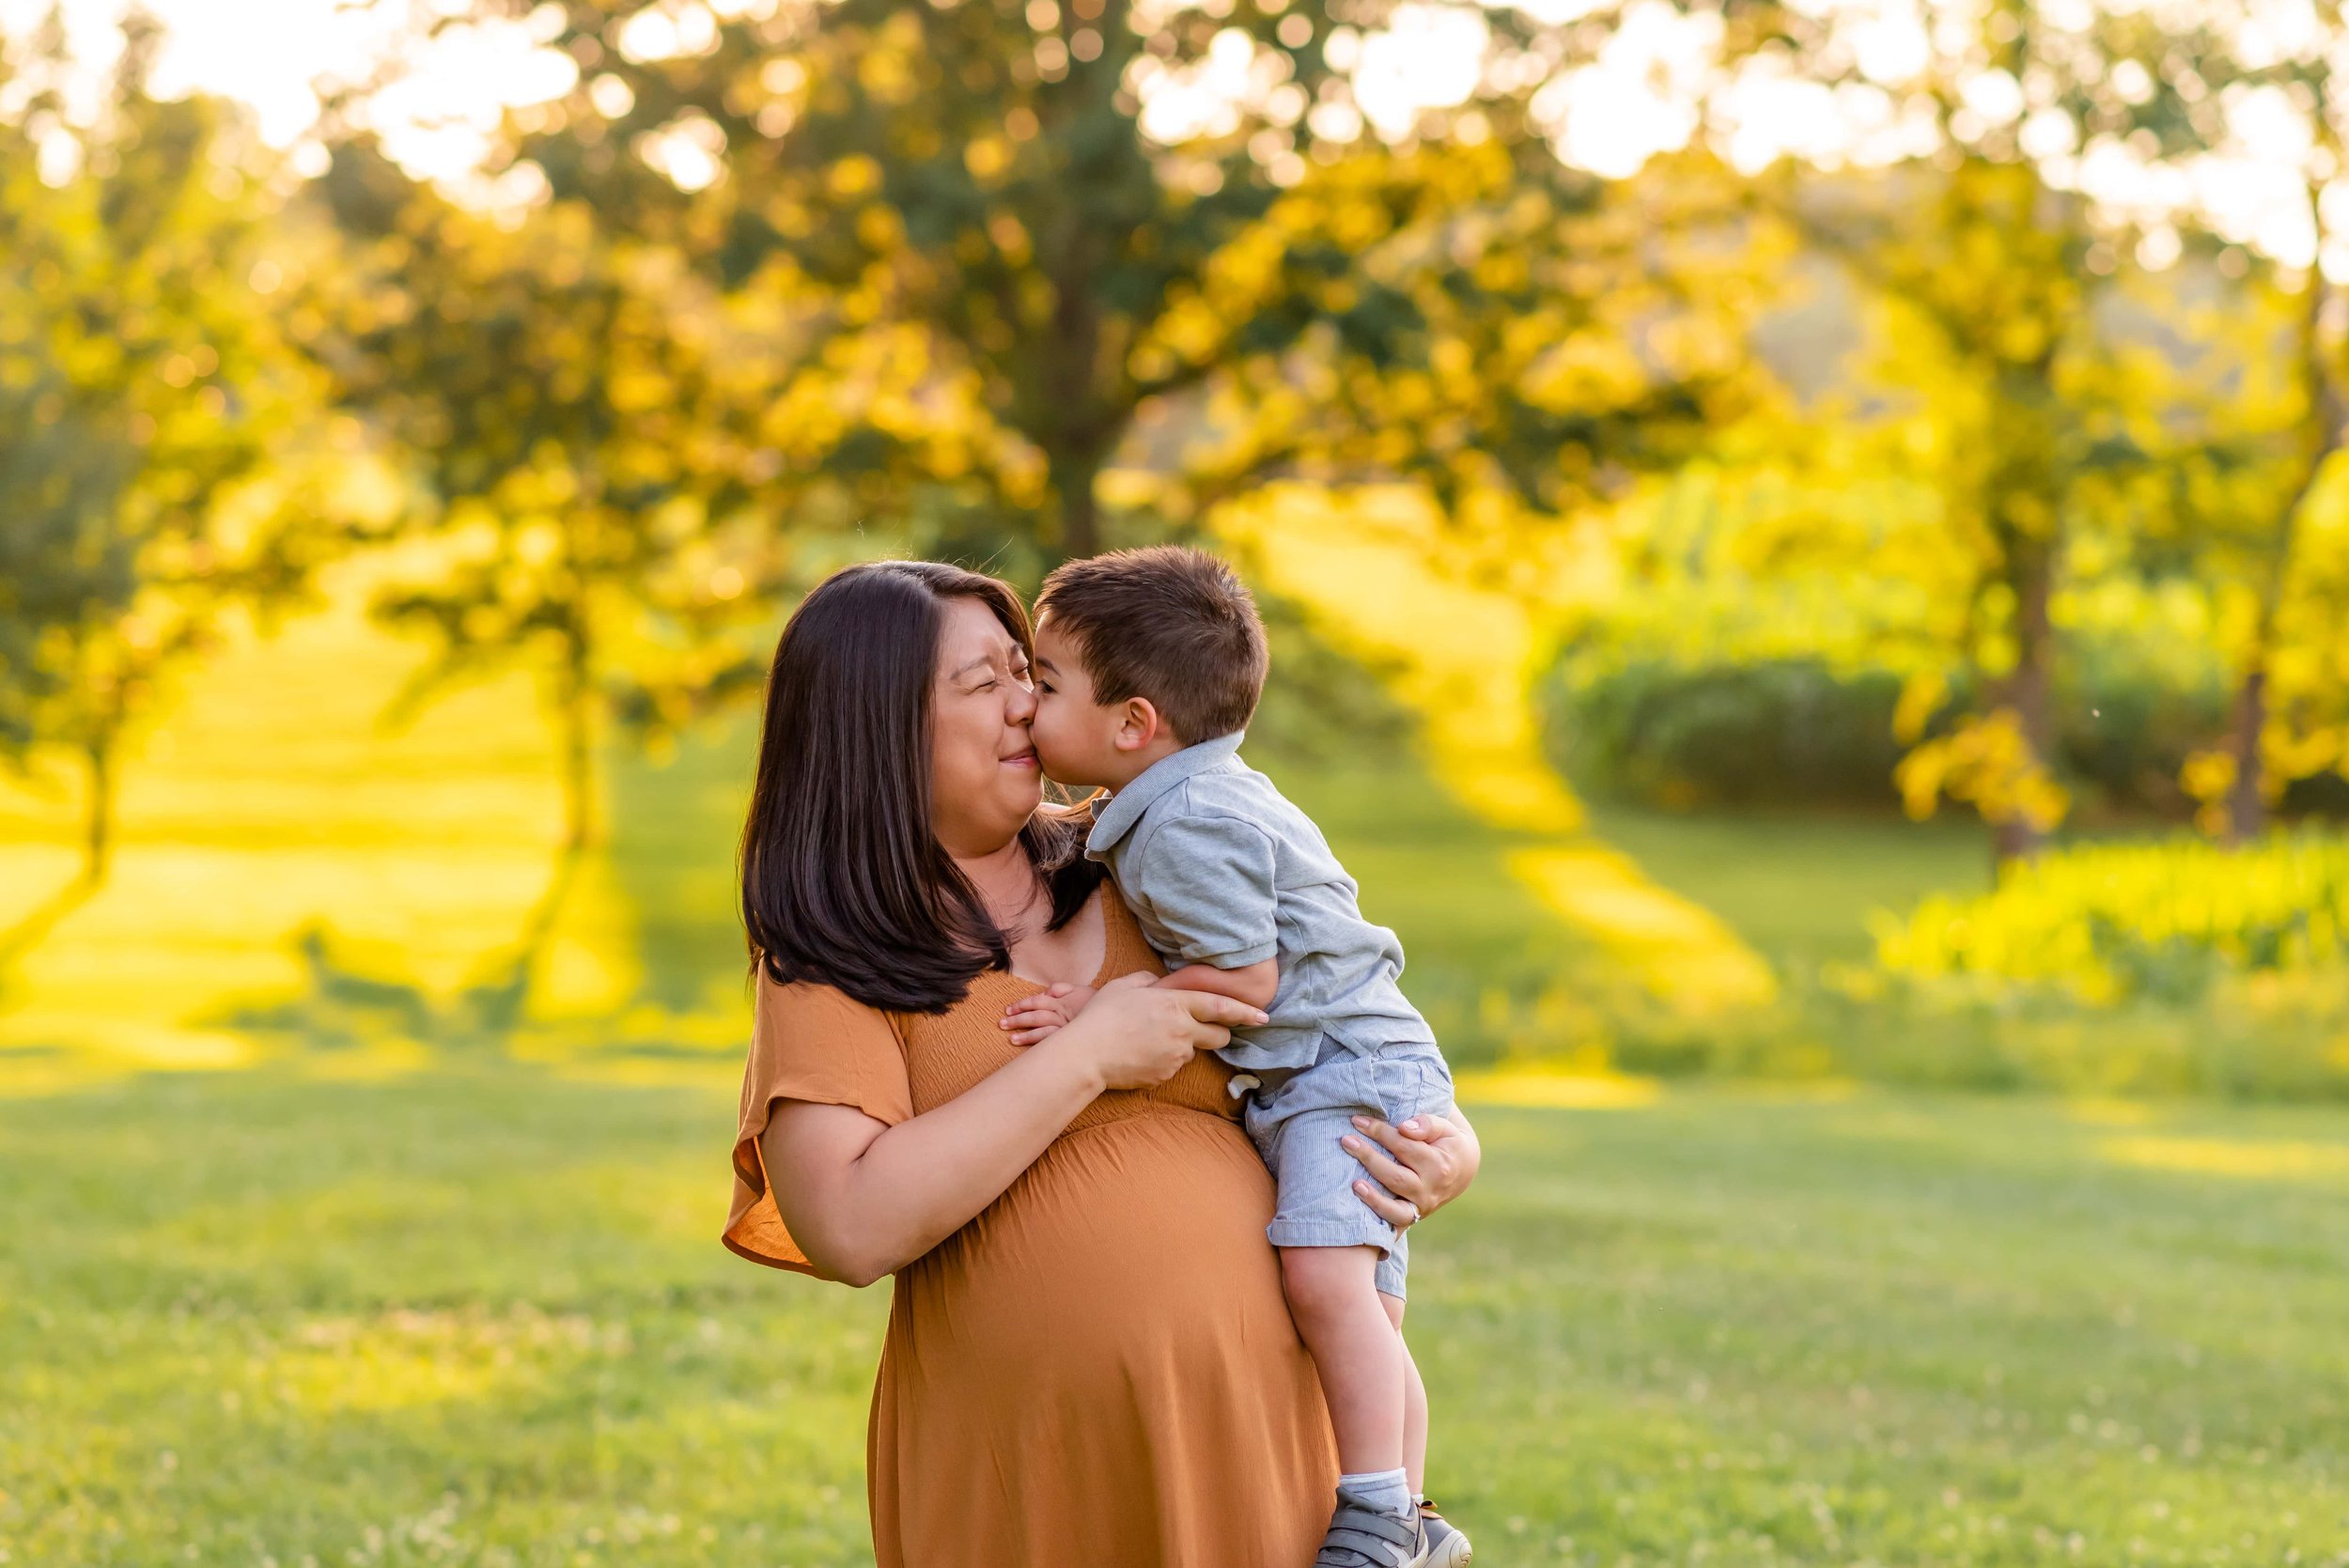 Maryland summer maternity photos with mom and son laughing together in a field